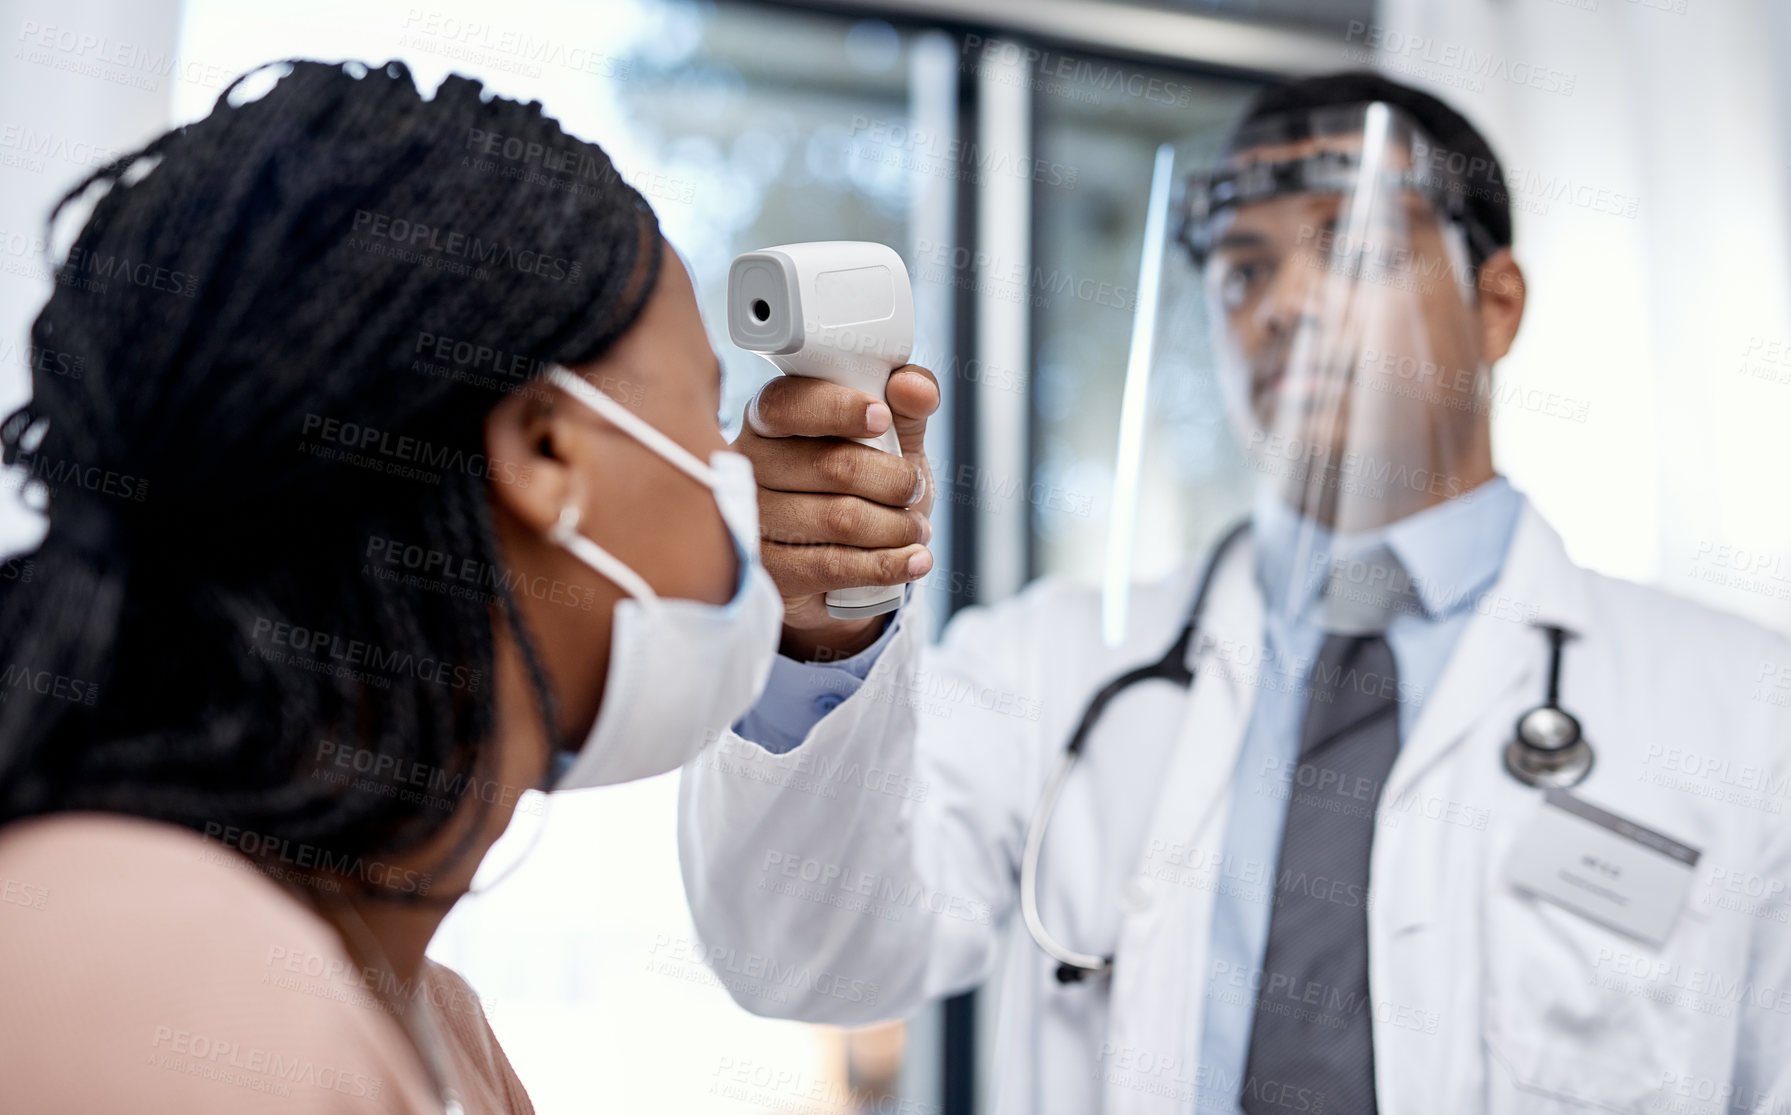 Buy stock photo Shot of a doctor taking a patient's temperature with an infrared thermometer